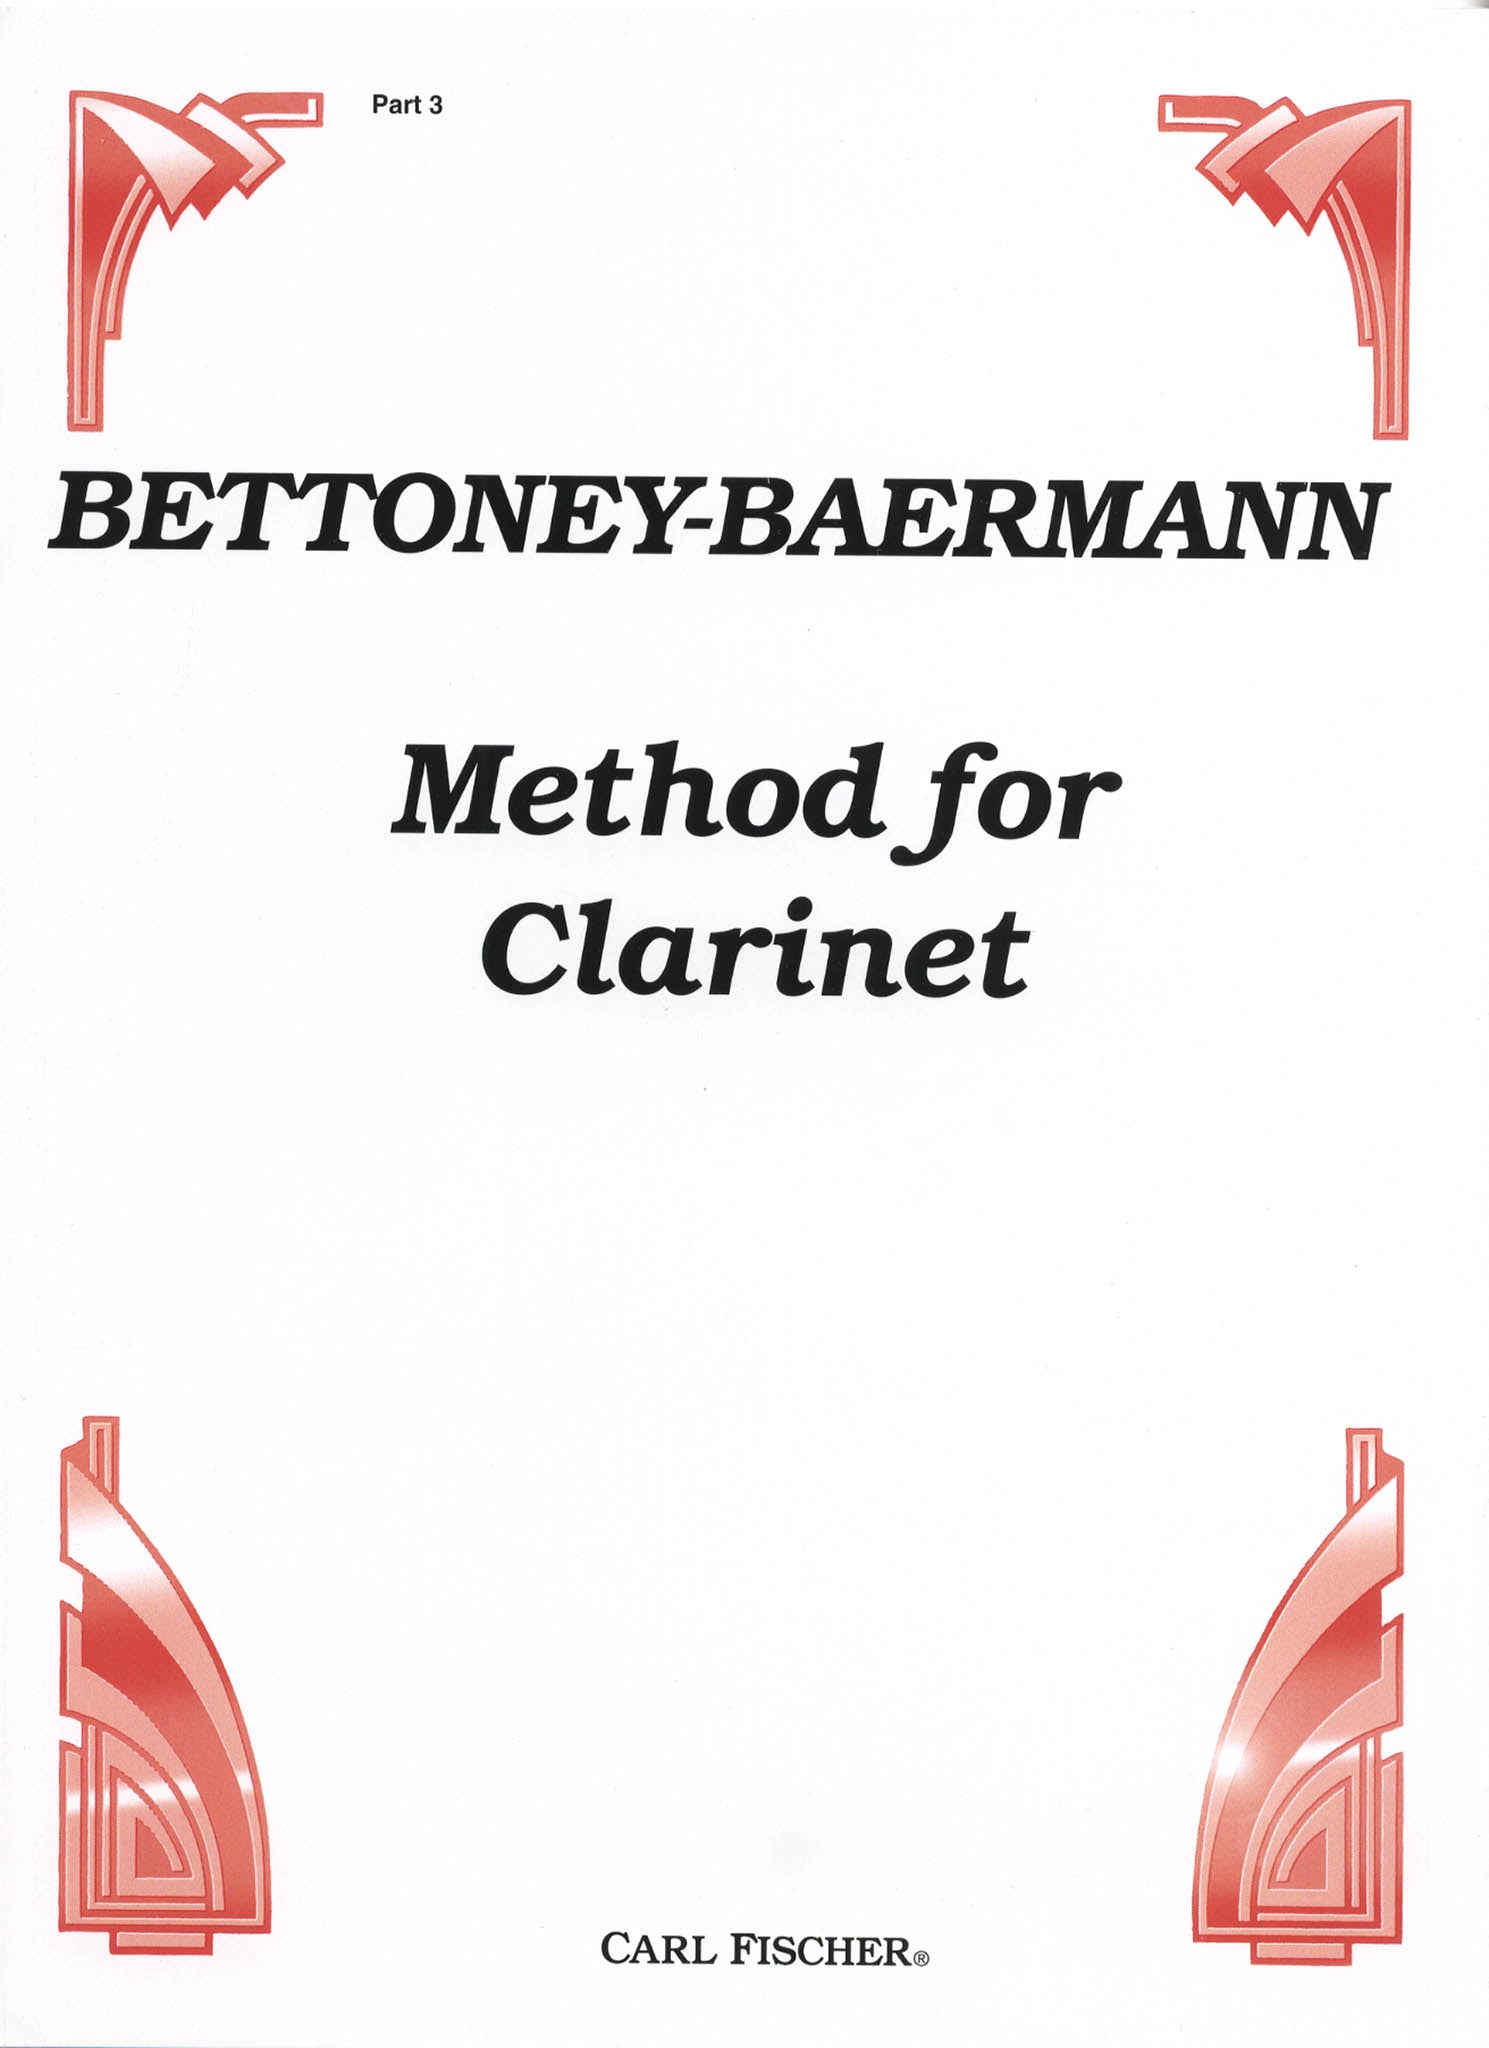 Complete Clarinet Method, Op. 63: Division 3 (Daily Studies) Cover